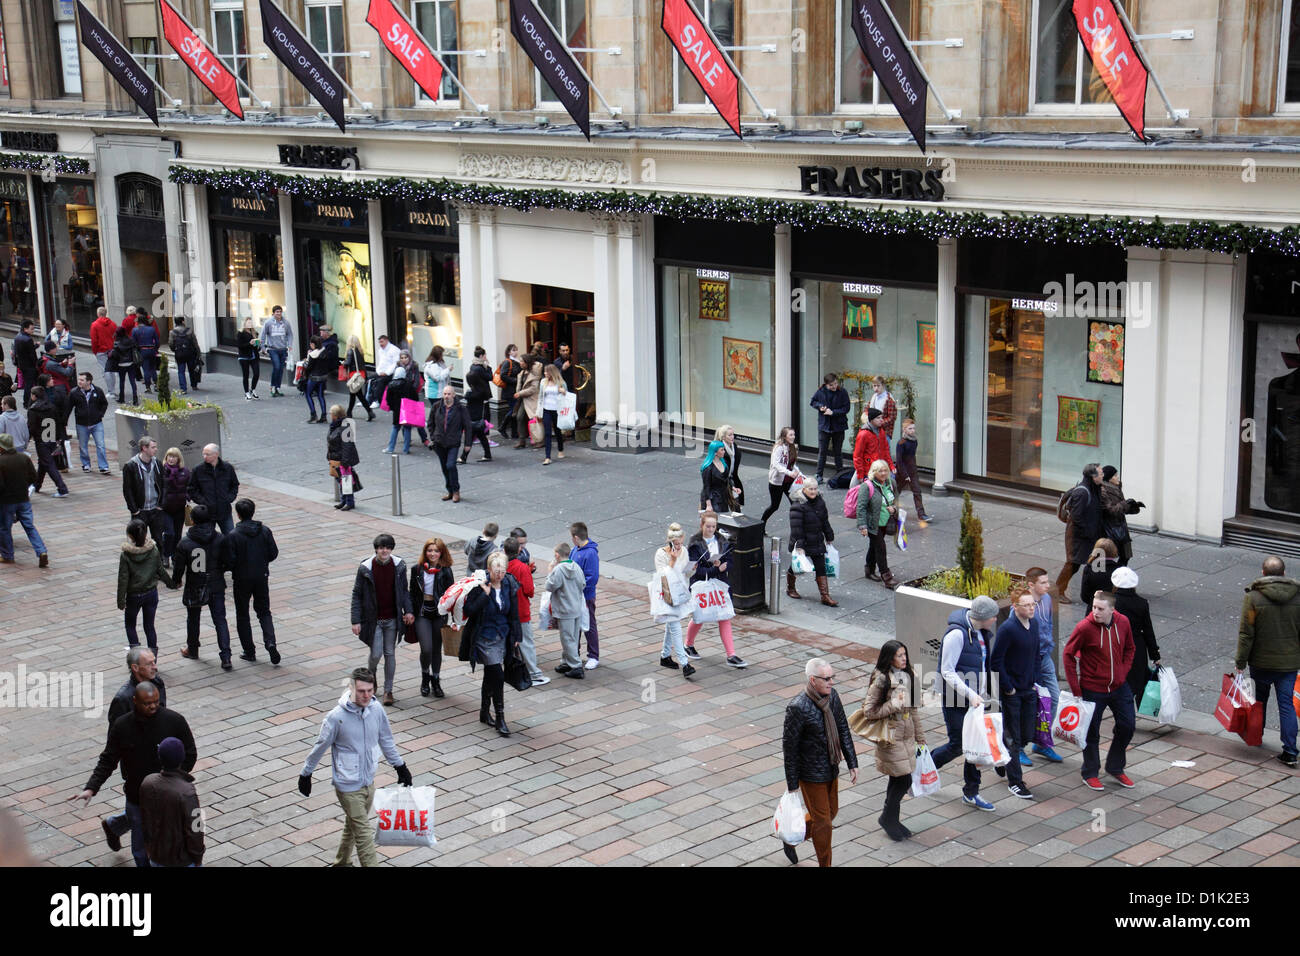 Buchanan Street, Glasgow, Scotland, UK, Wednesday, 26th December, 2012. People shopping at the Boxing Day sales in the city centre beside the House of Fraser Department Store Stock Photo